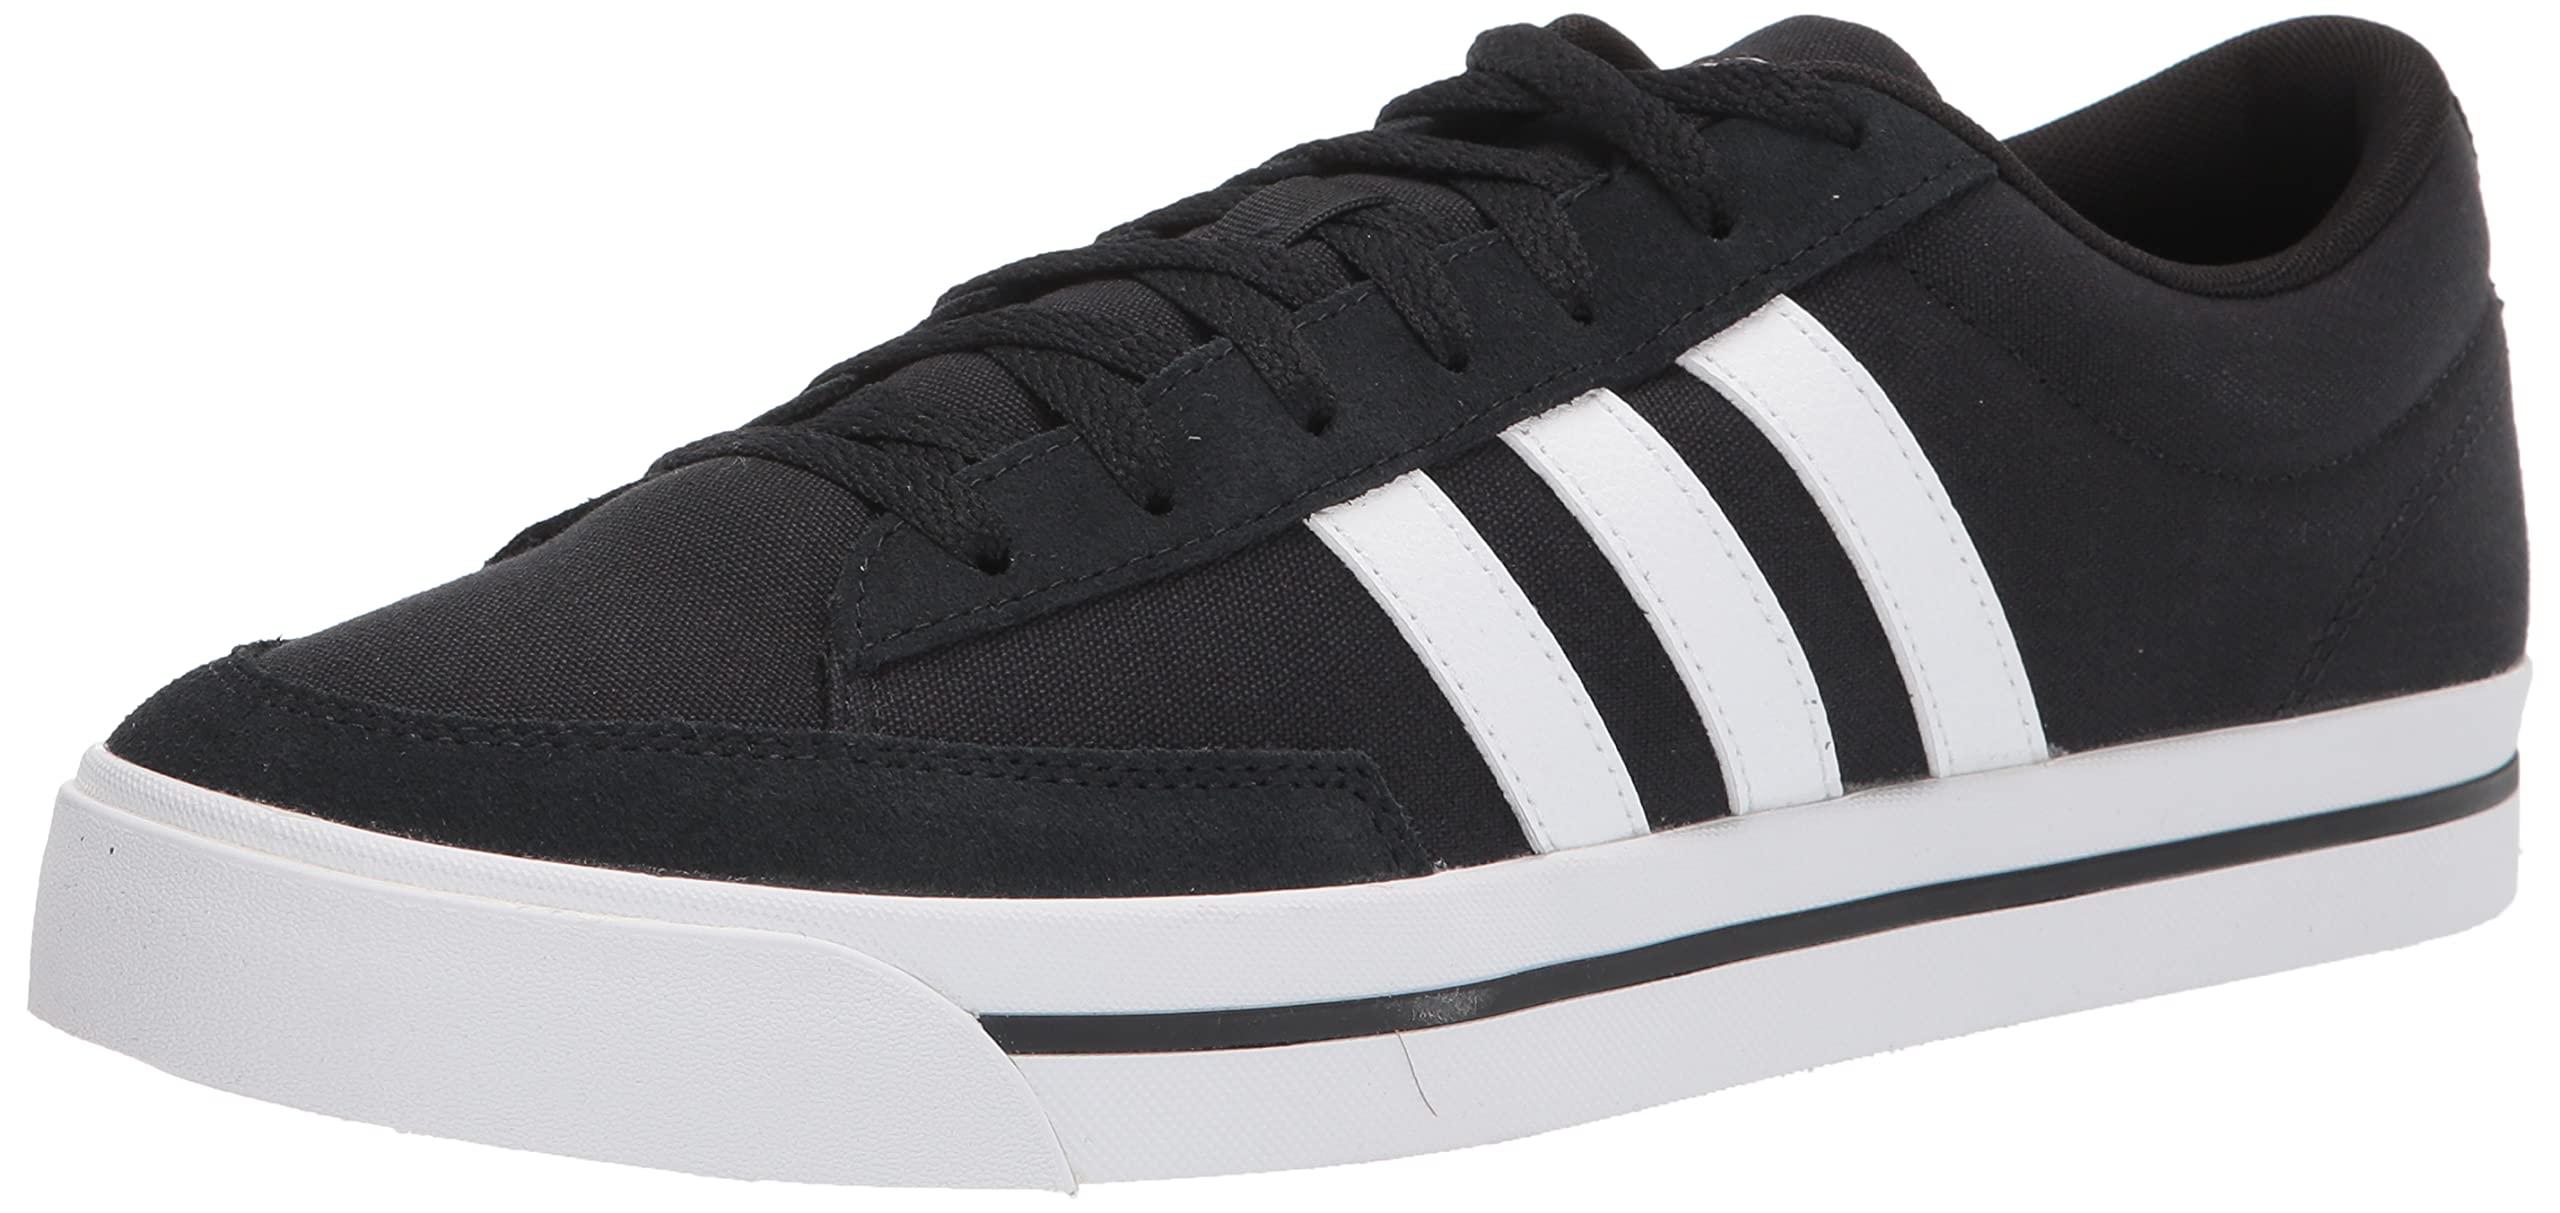 adidas Lace Retrovulc Skate Shoe in Black/Cloud White/Black (Black) for Men  - Save 17% | Lyst